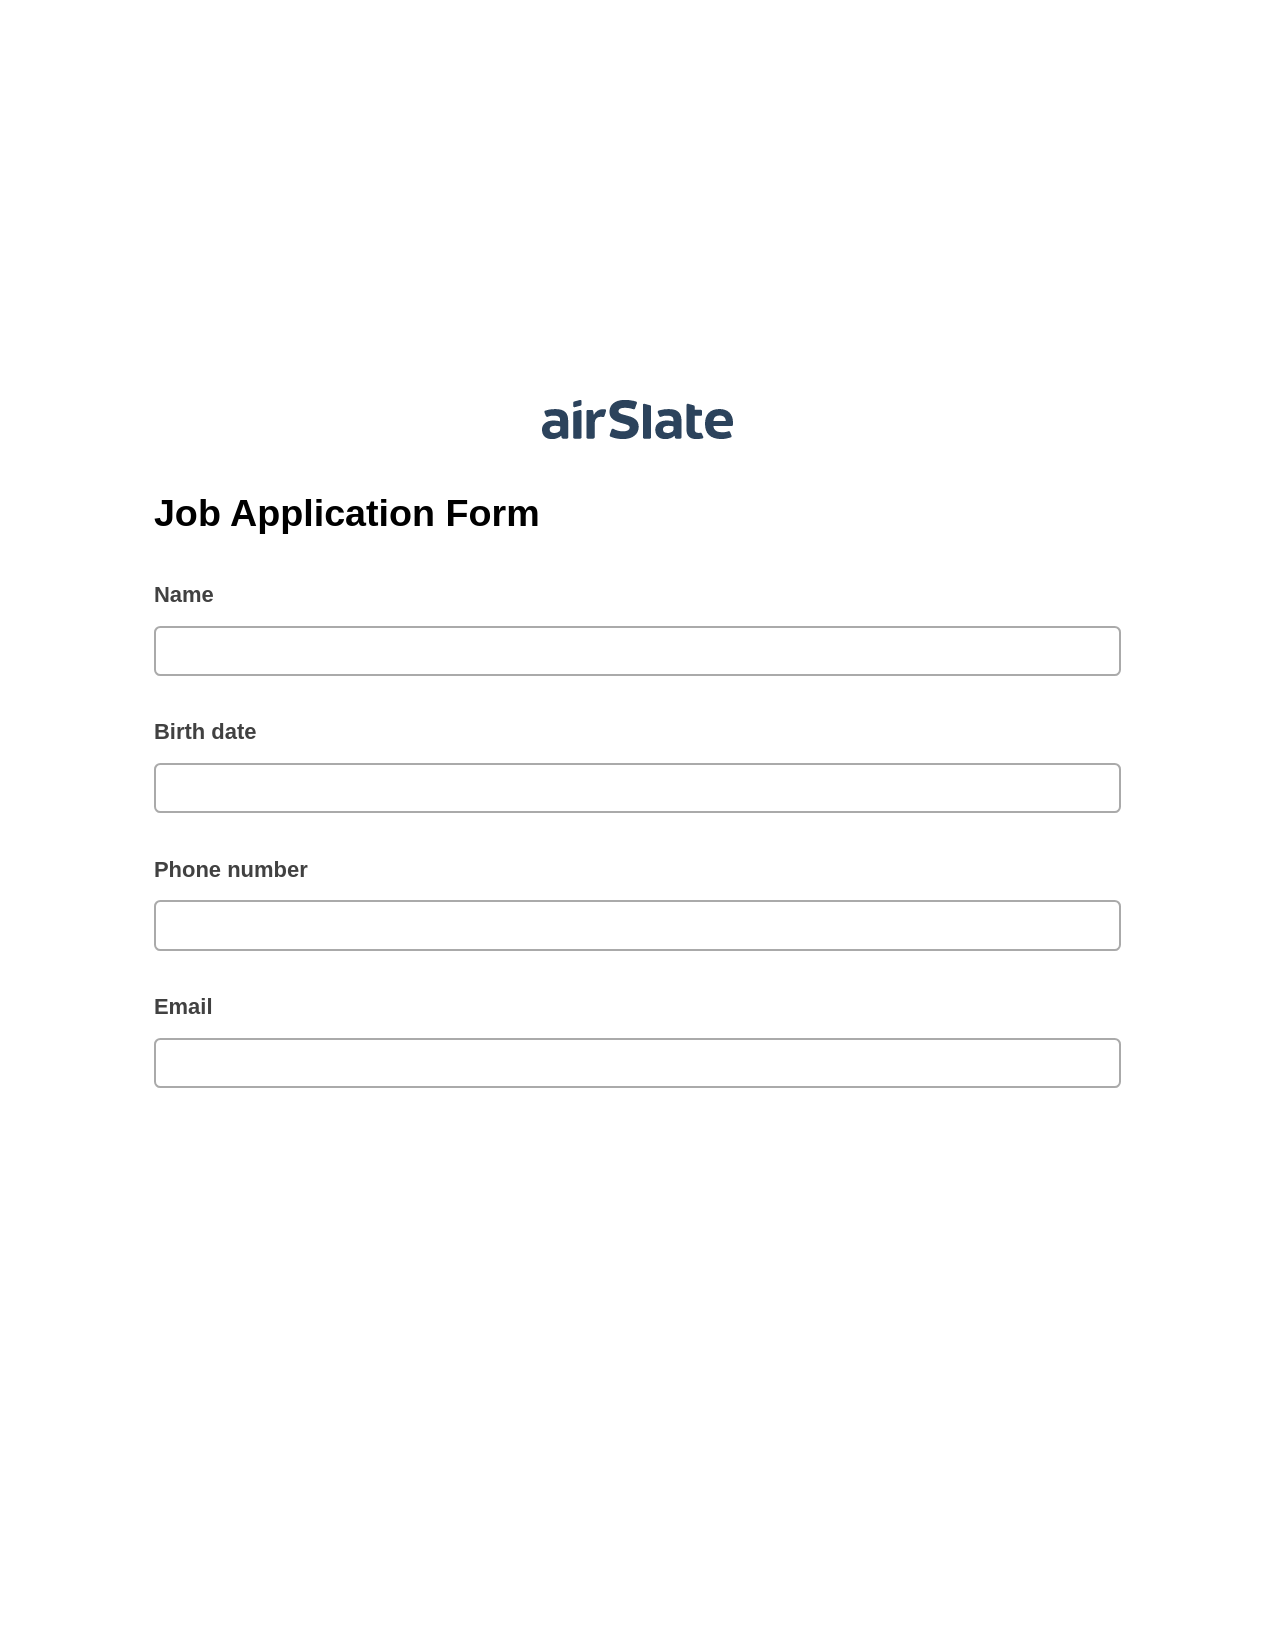 Job Application Form Pre-fill from Excel Spreadsheet Bot, Create slate bot, Export to Google Sheet Bot